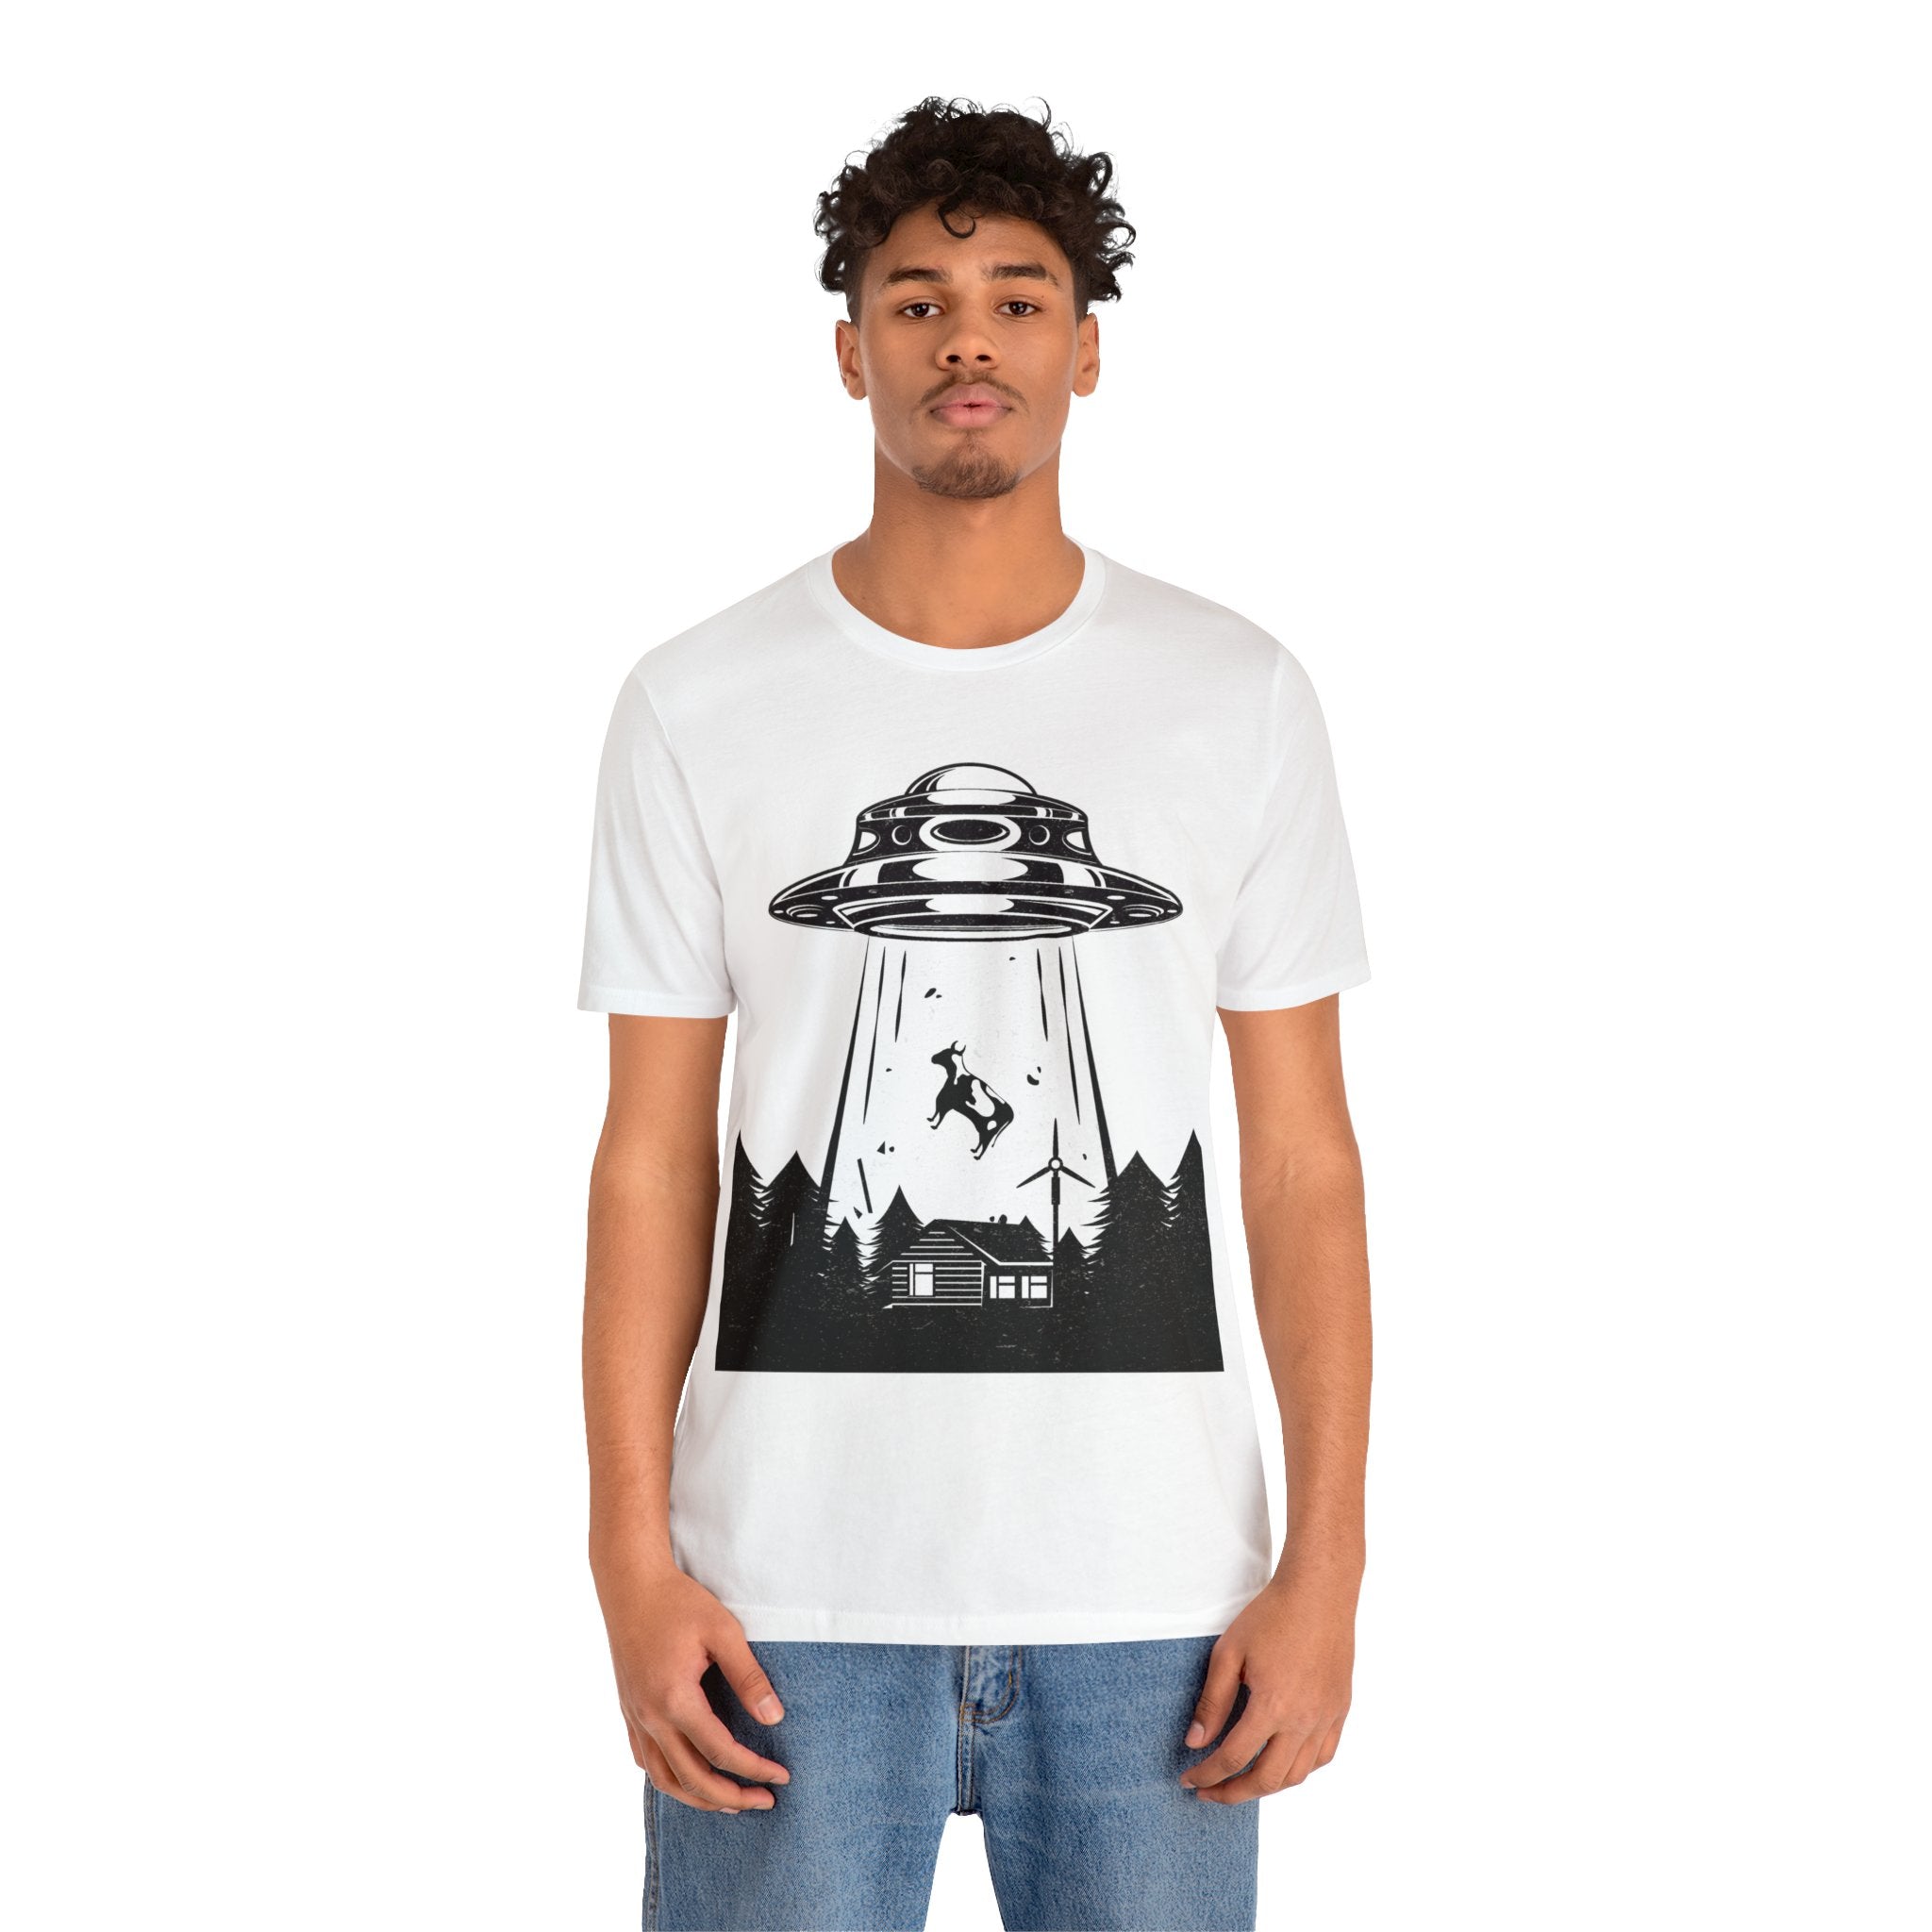 A man wearing a white t-shirt featuring an Alien Abduction image is the perfect geeky accessory for sci-fi enthusiasts.